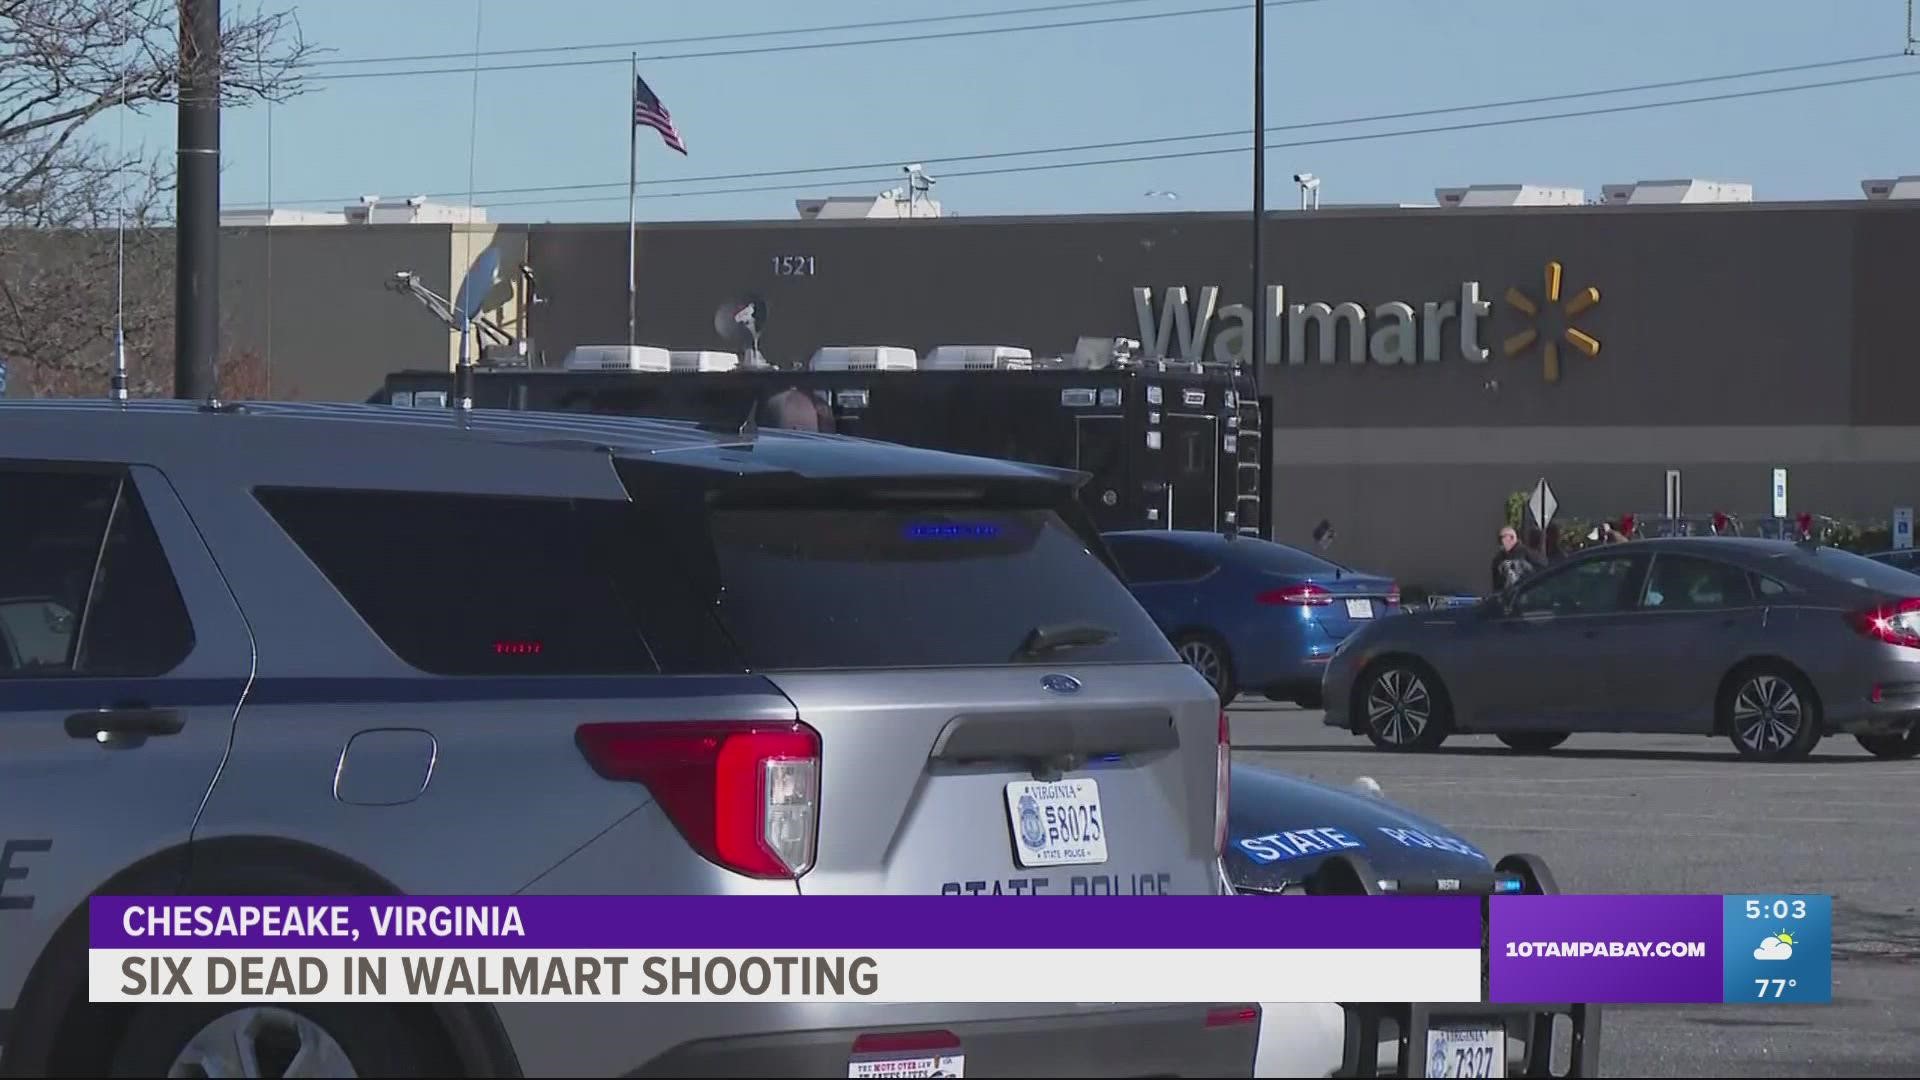 “I looked up, and my manager just opened the door and he just opened fire,” employee Briana Tyler said.